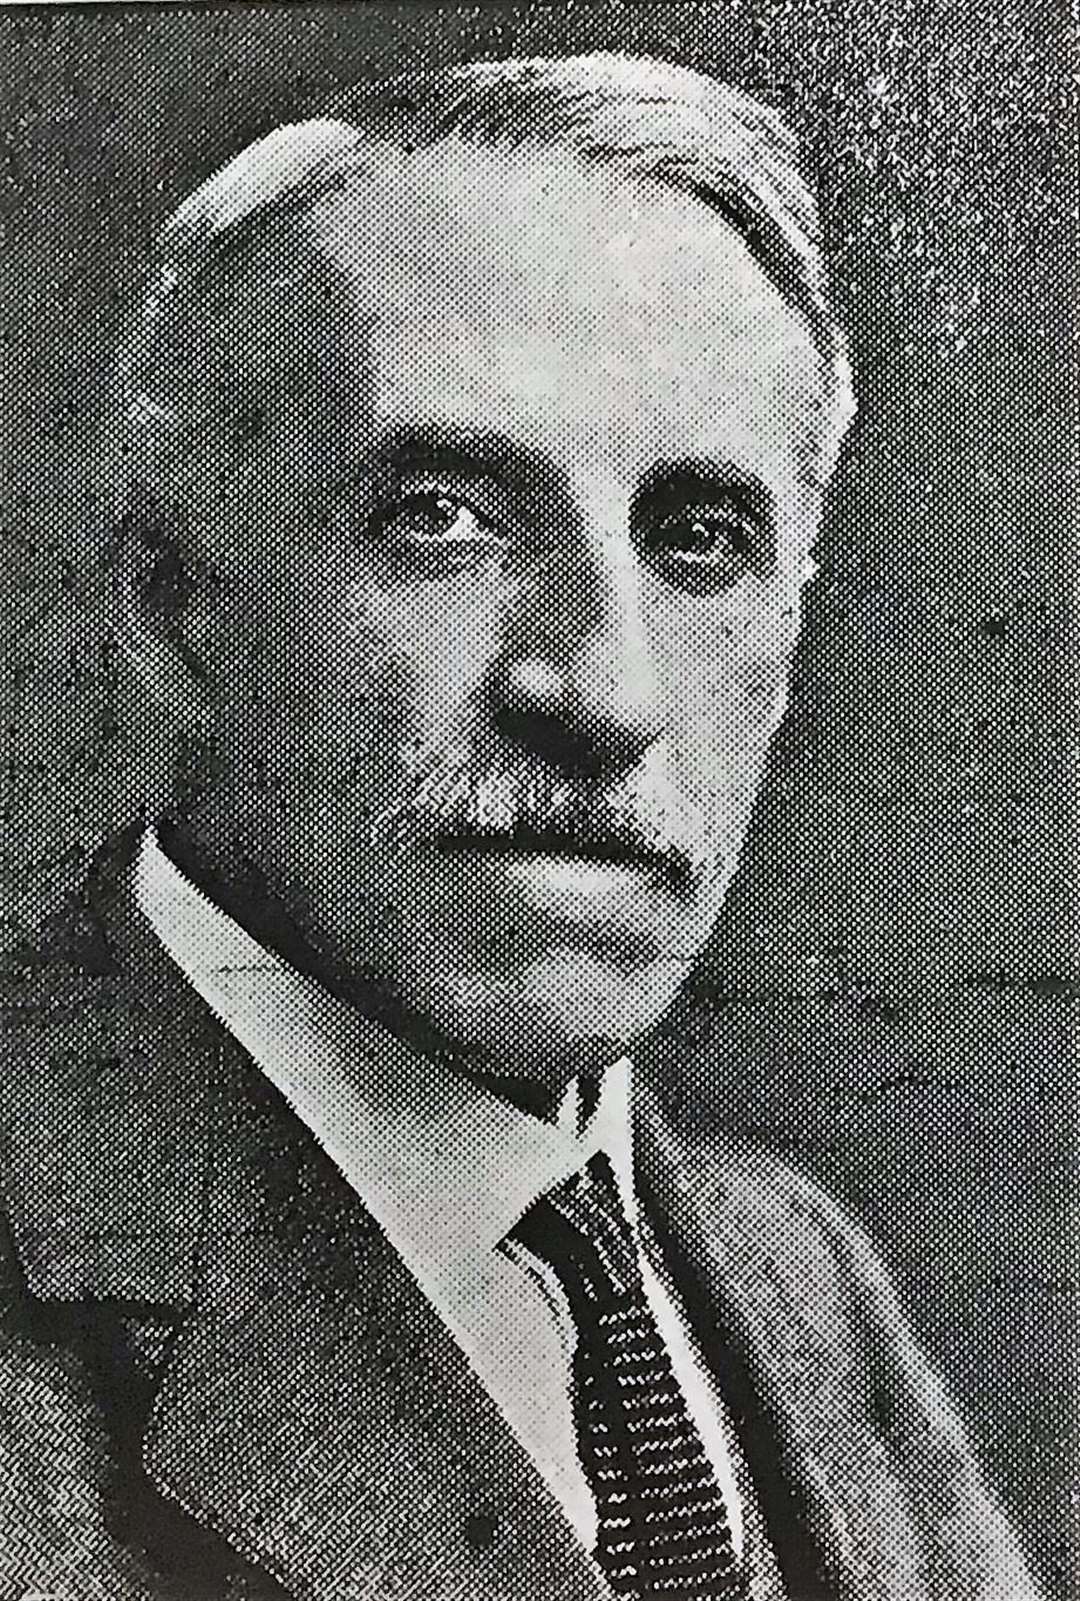 Pastor Horne from a contemporary photograph that includes his nose as it should be.